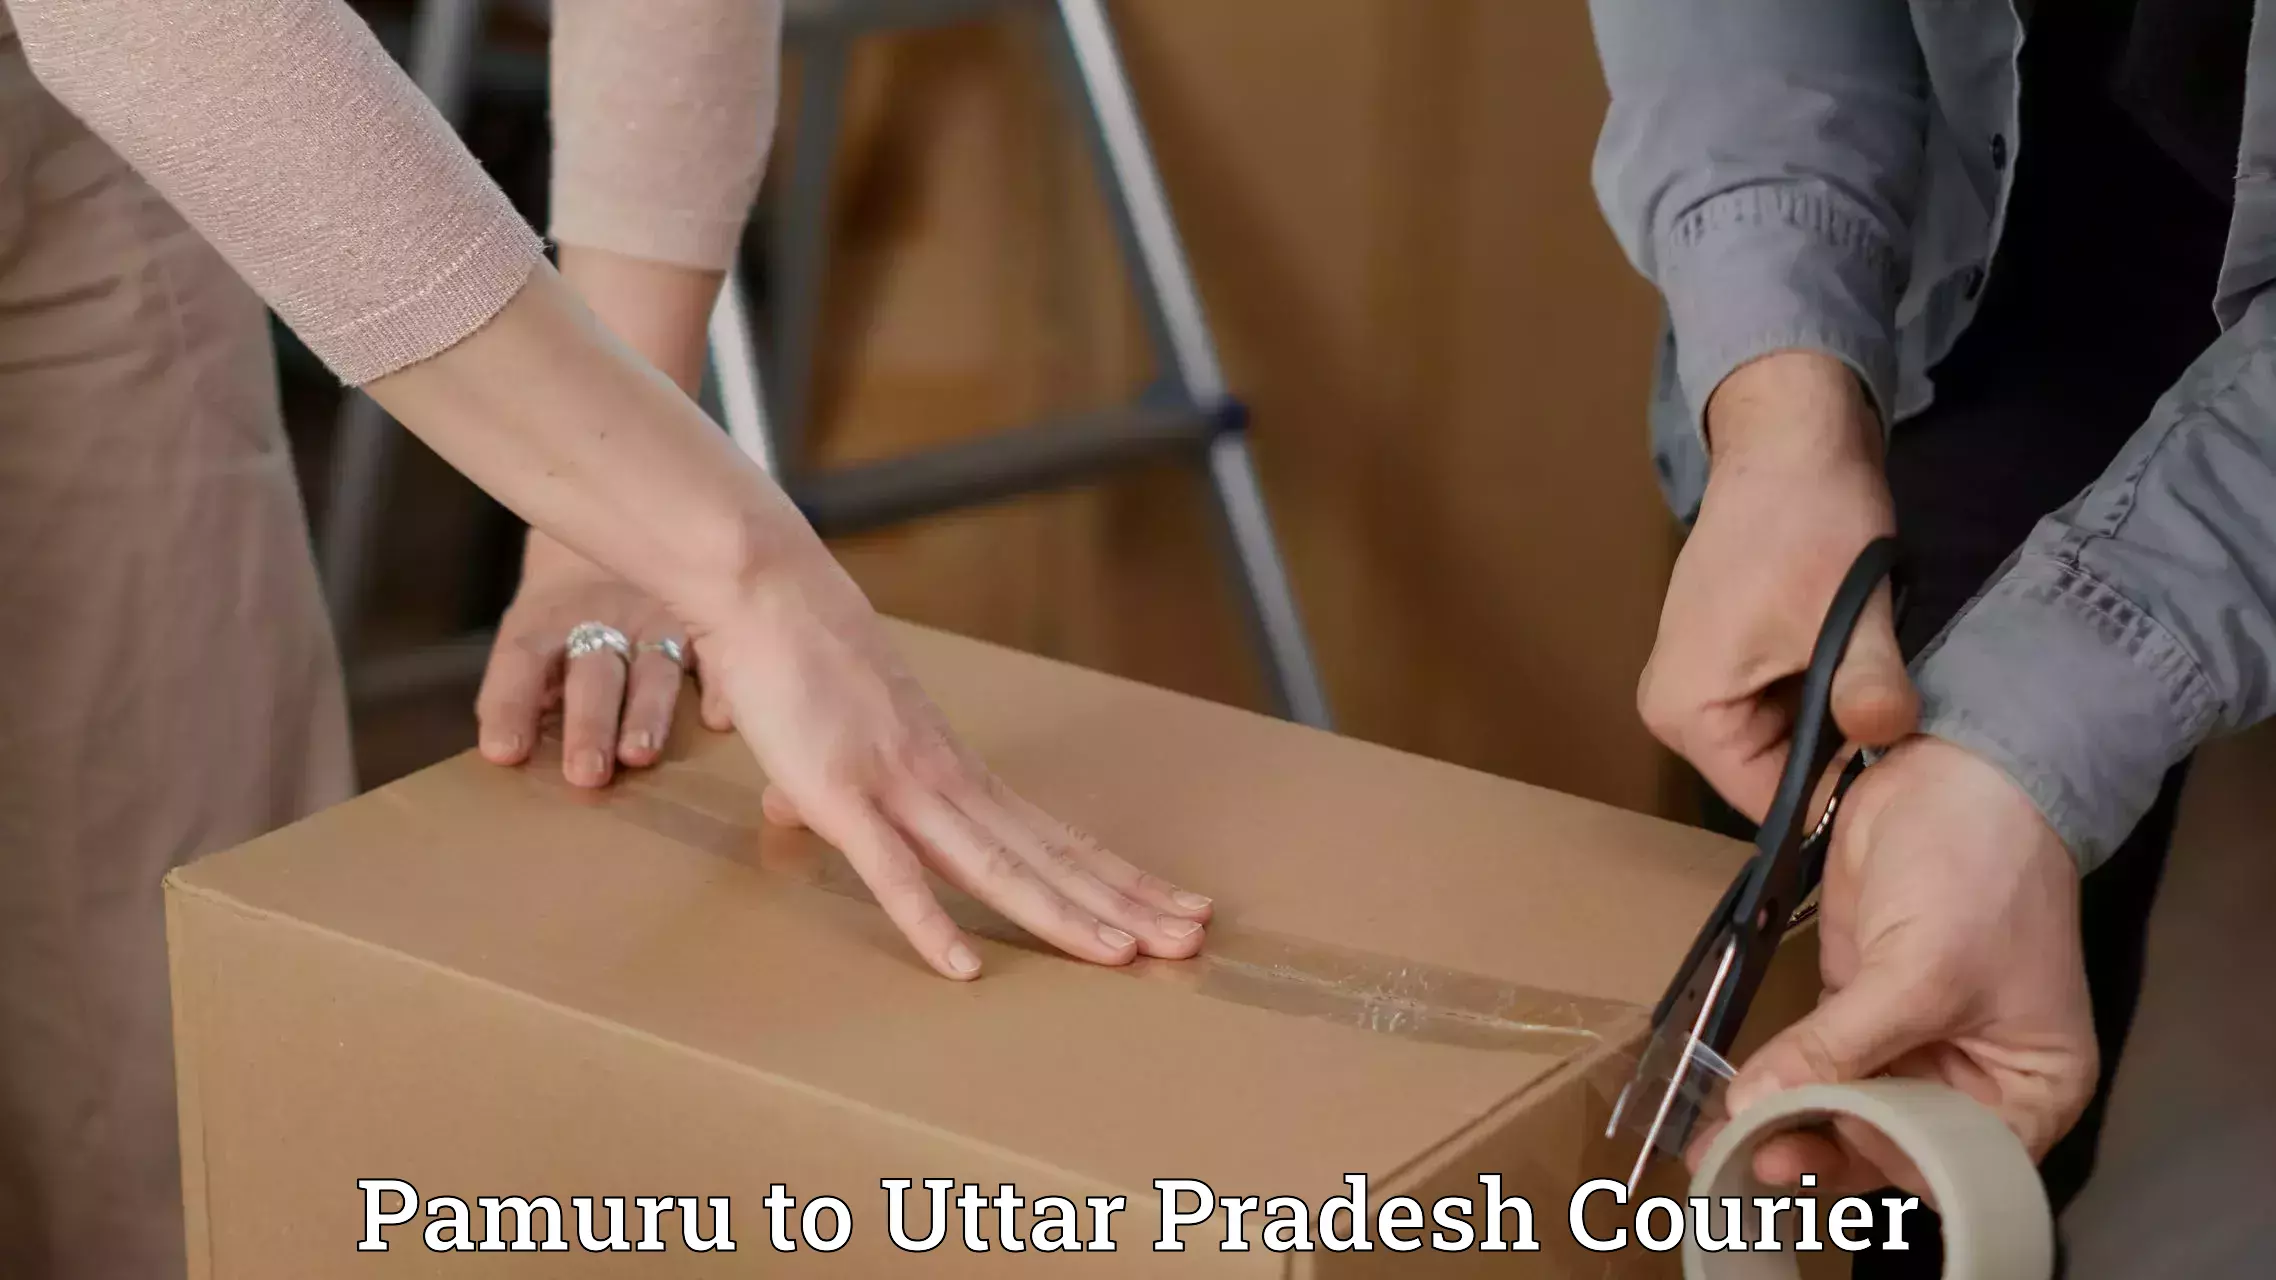 Easy access courier services Pamuru to Lucknow